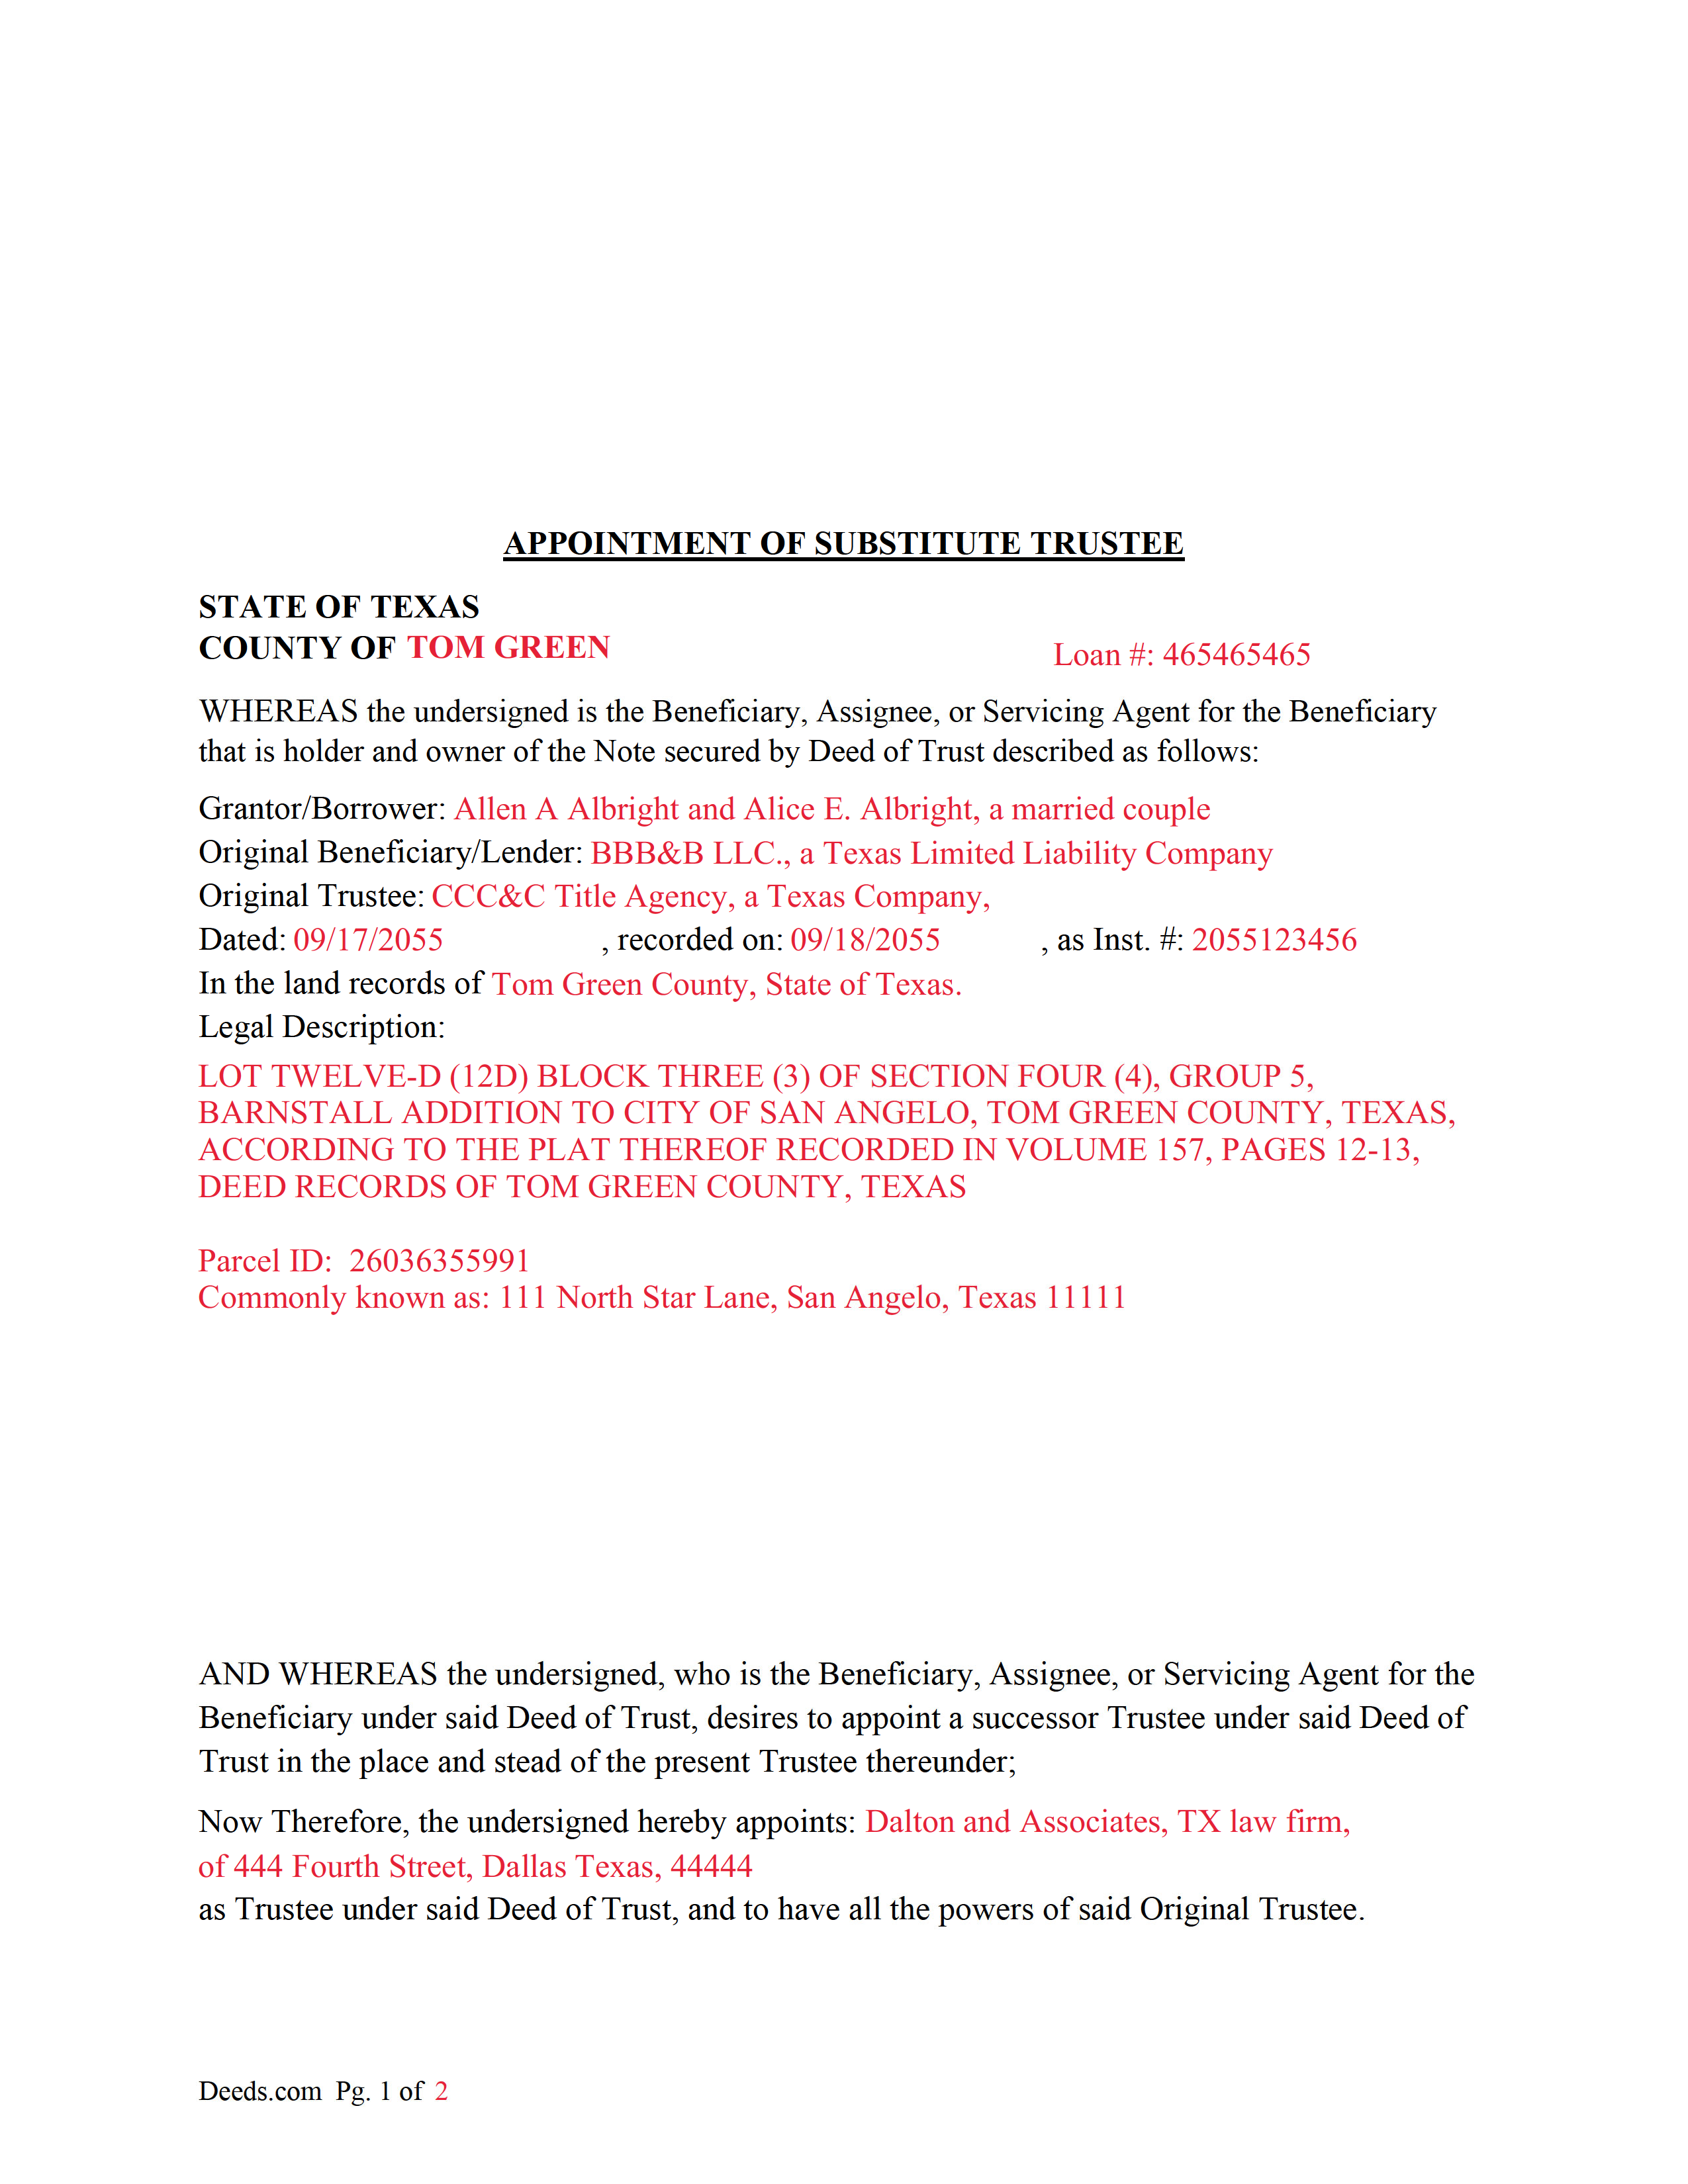 Completed Example of the Appointment of Substitute Trustee Document